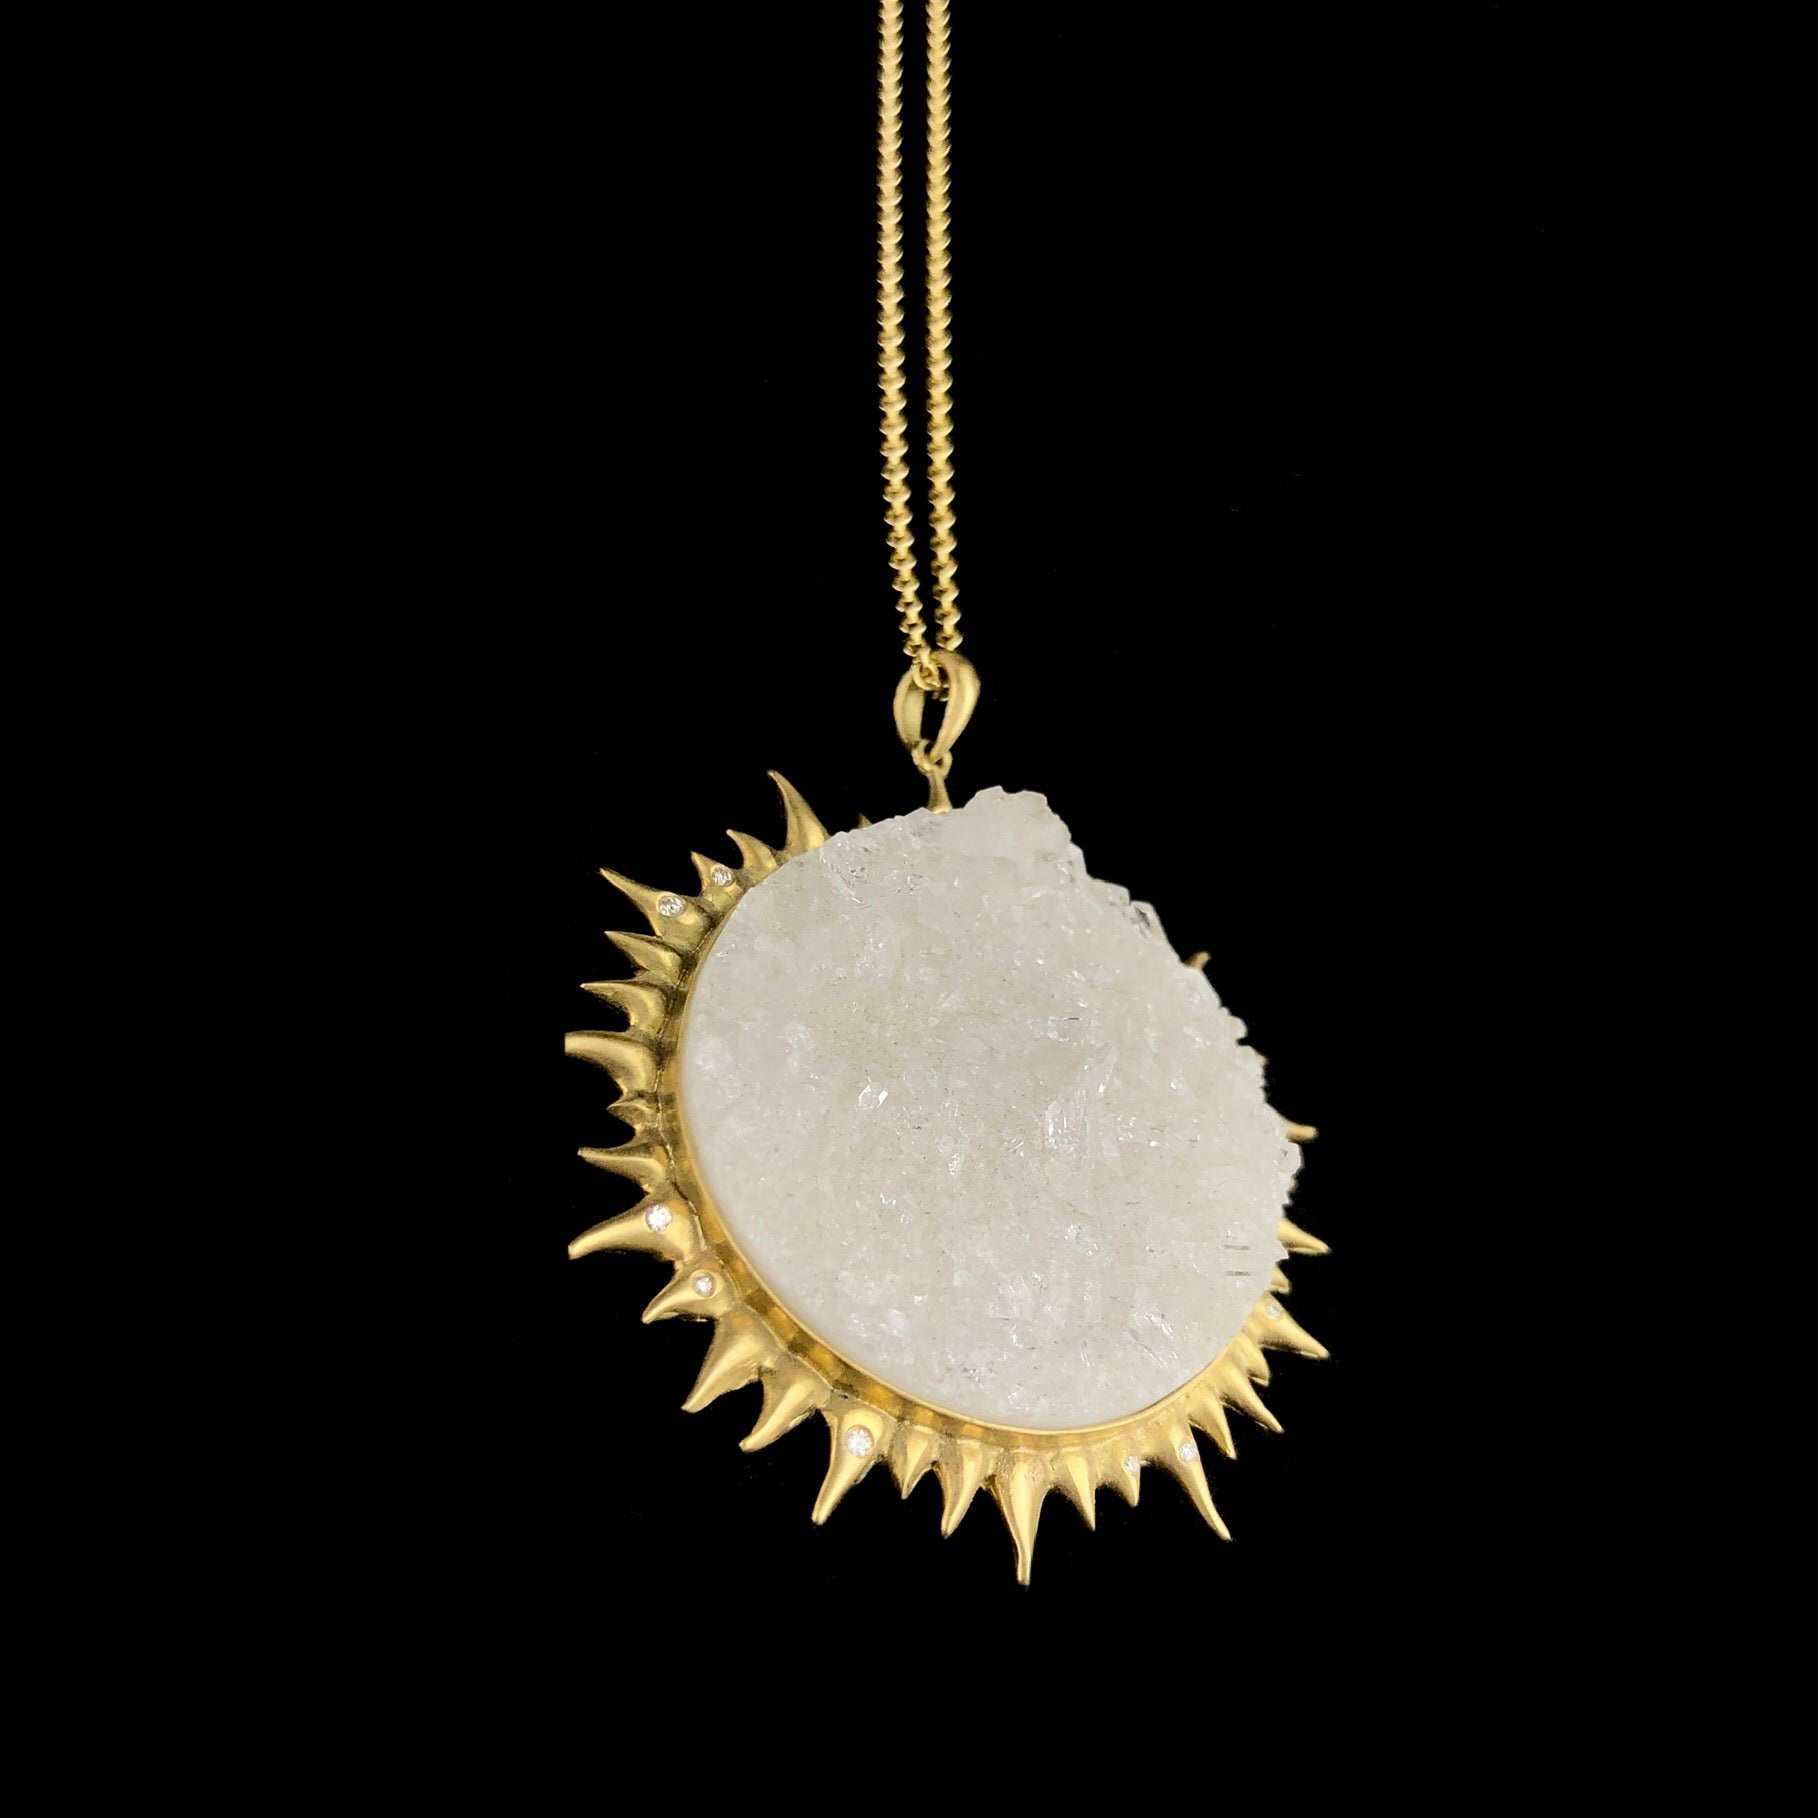 Detail view of crystalline surface and gold setting of Sun and Moon Necklace